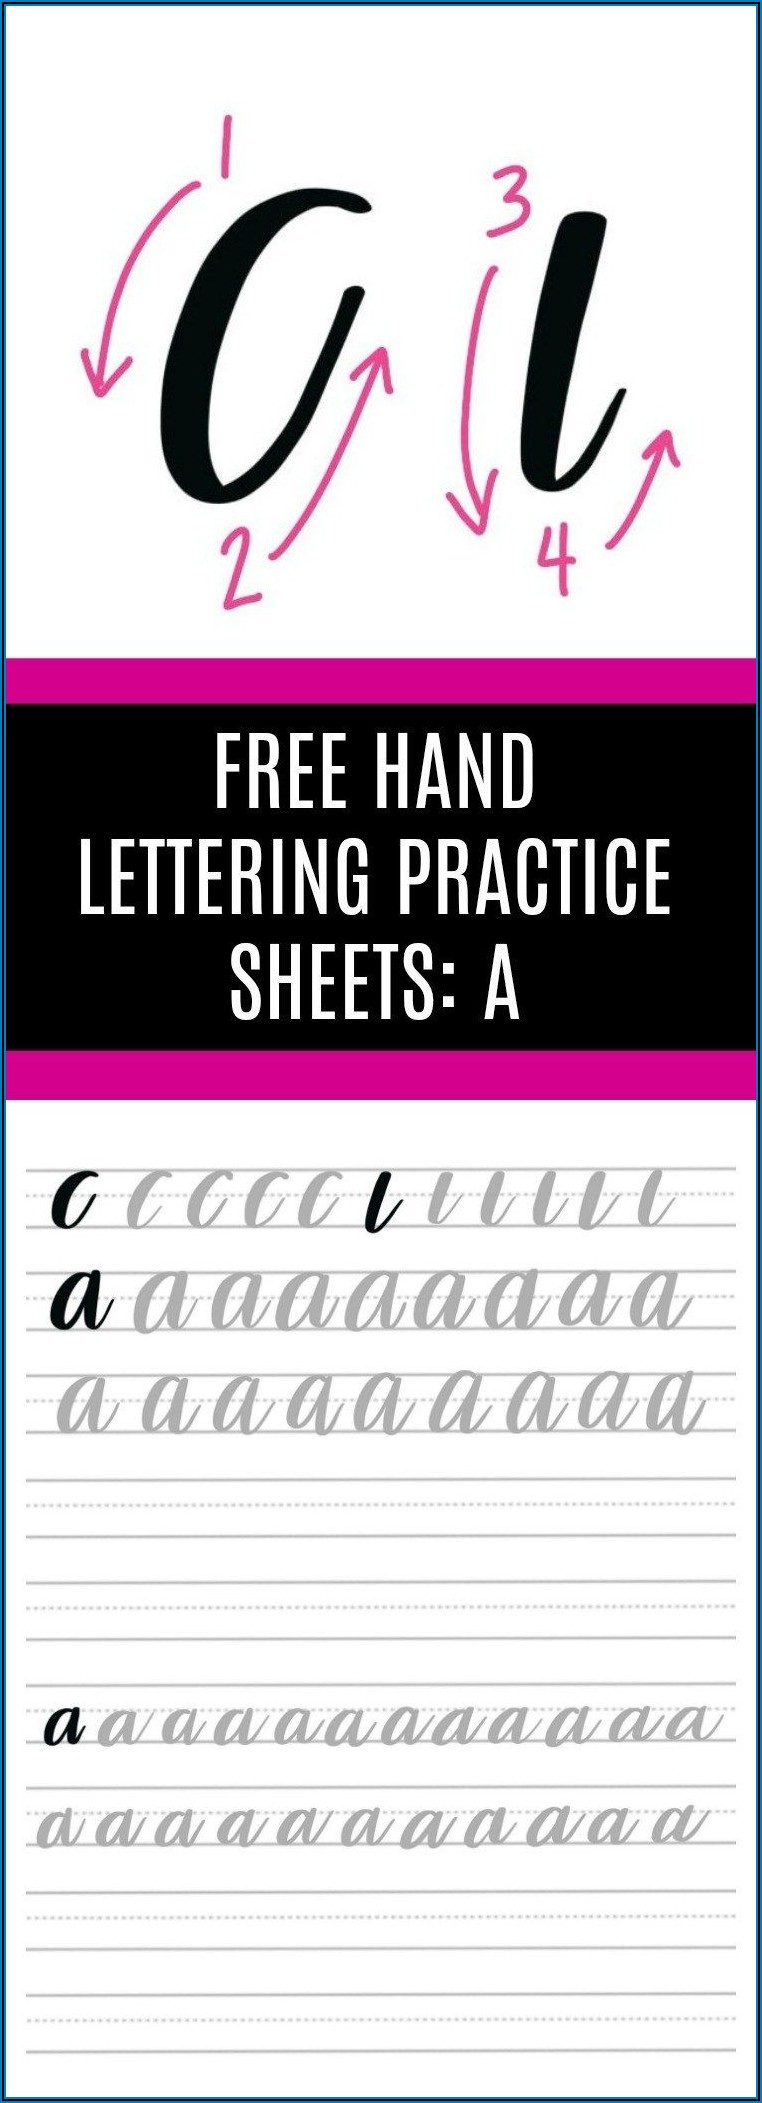 Hand Lettering Free Practice Sheet